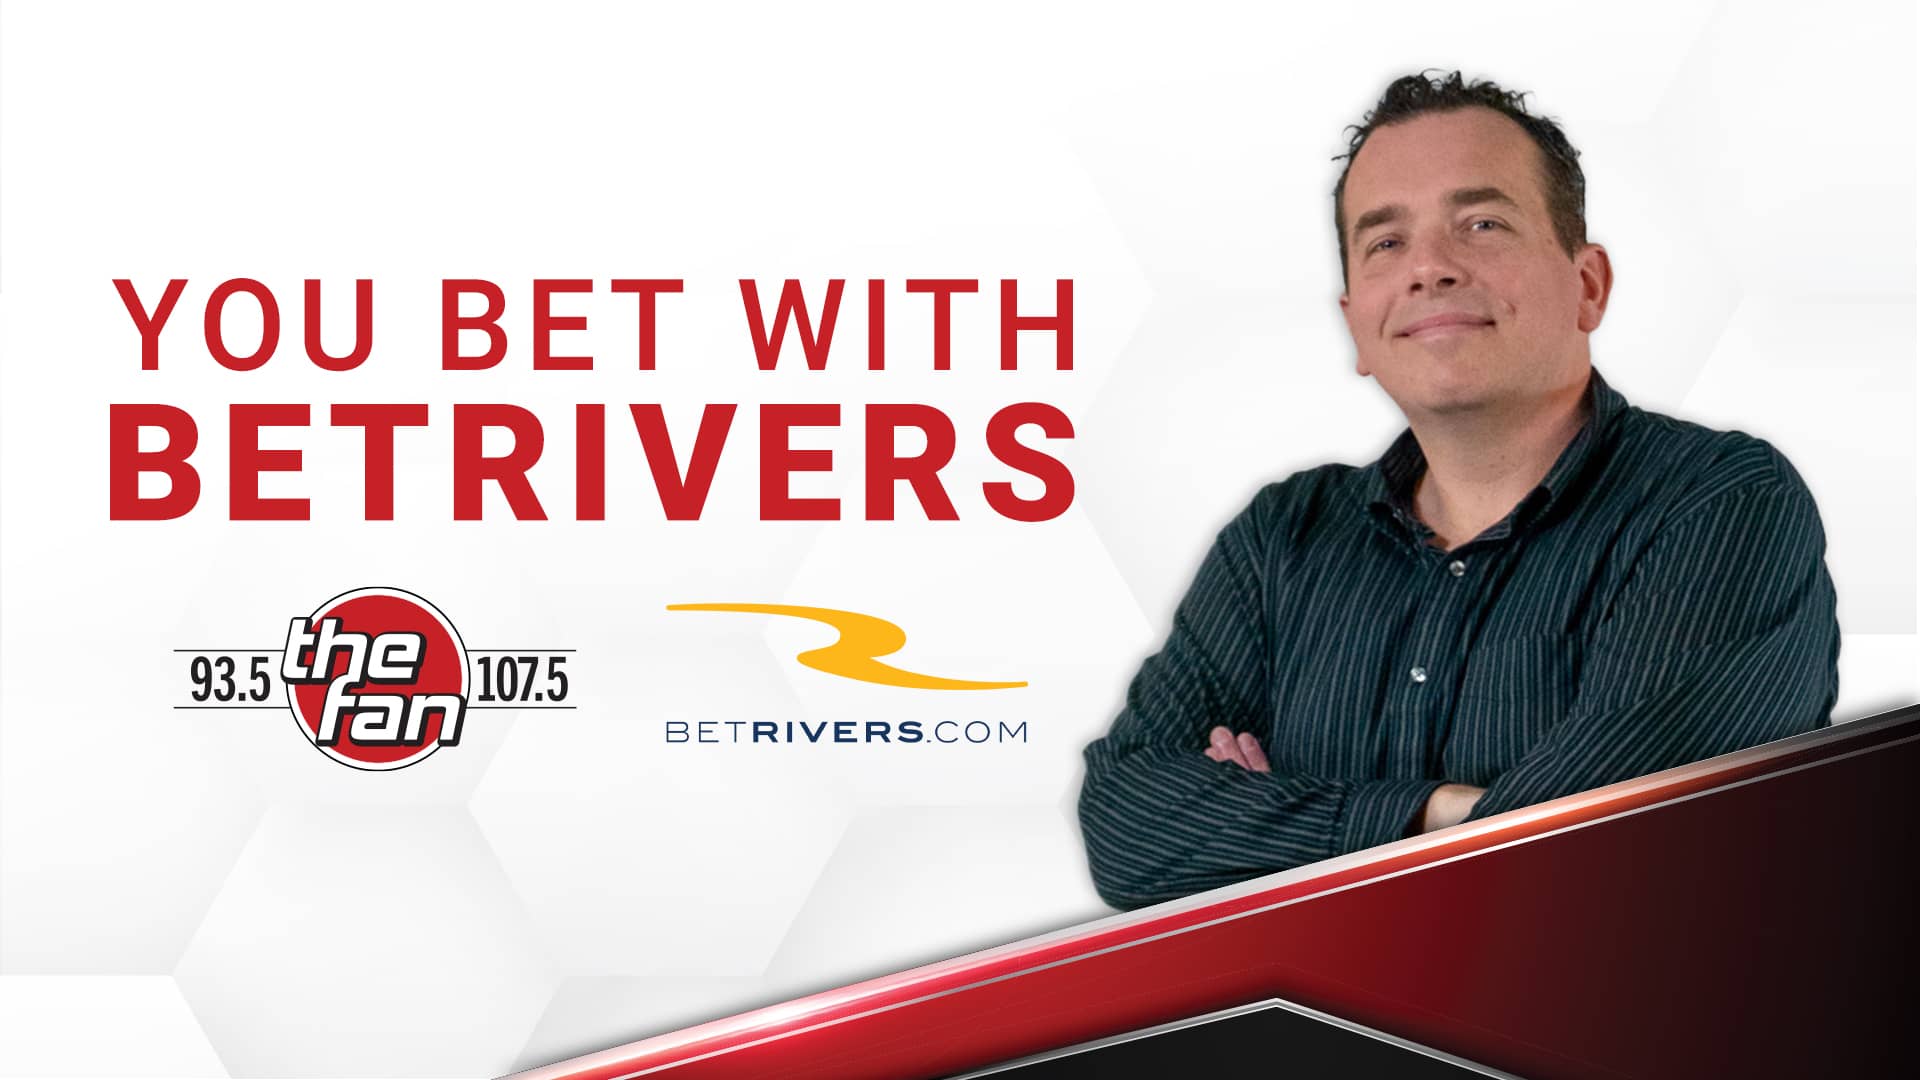 You bet with Bet rivers